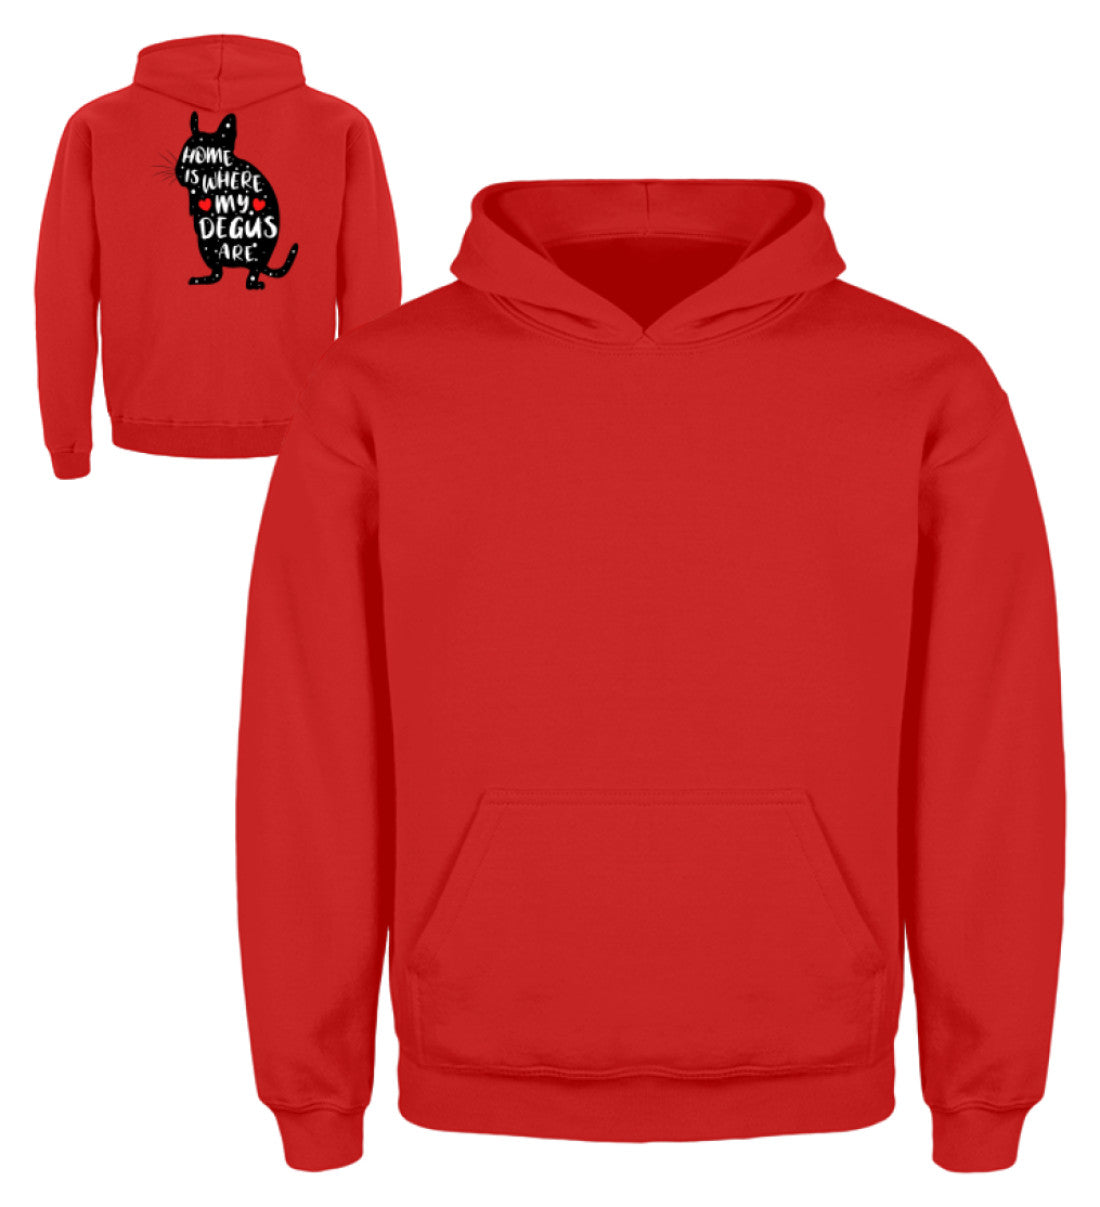 Zeigt funny adorable degu saying rodent kinder hoodie in Farbe Feuerrot